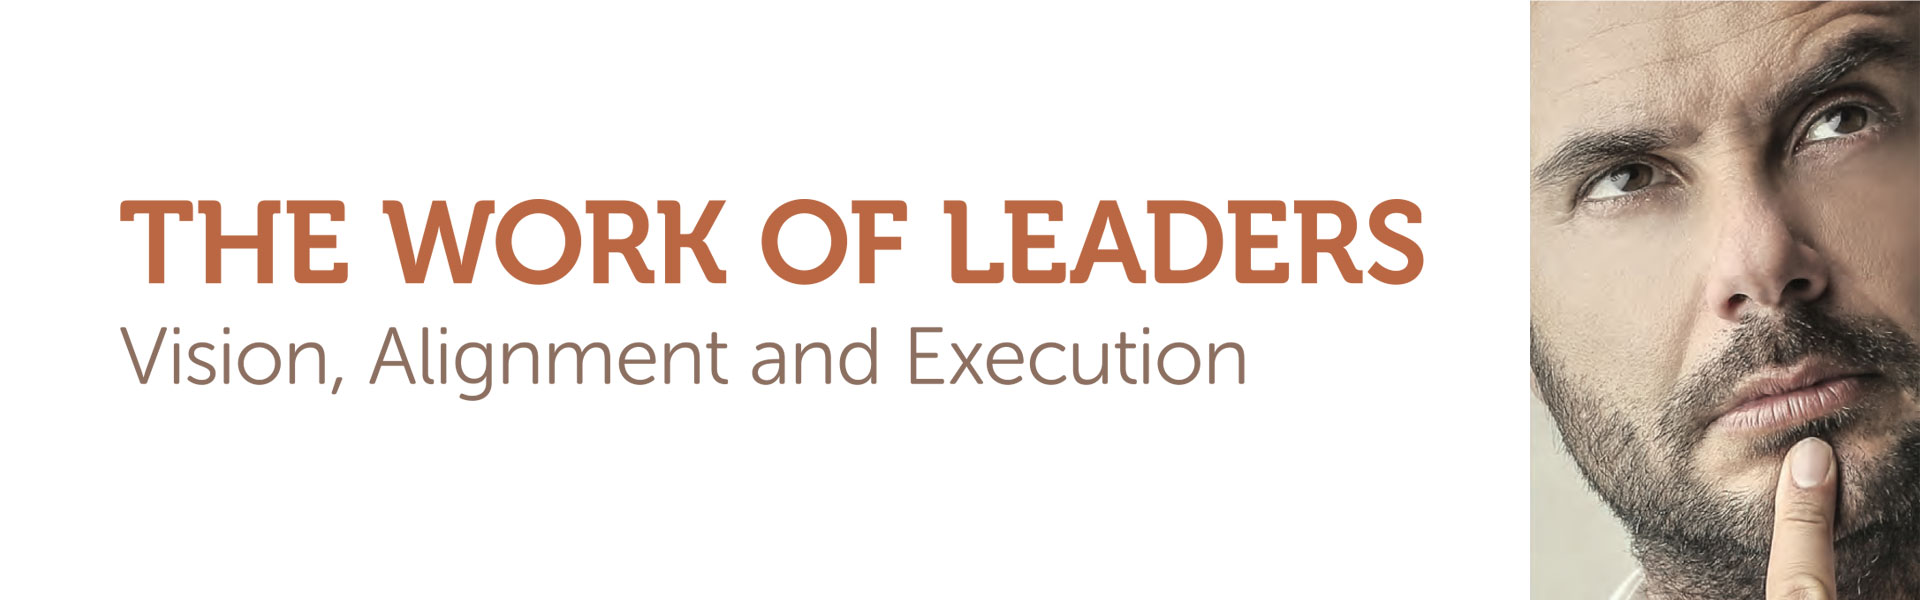 The Work of Leaders: Vision, Alignment and Execution